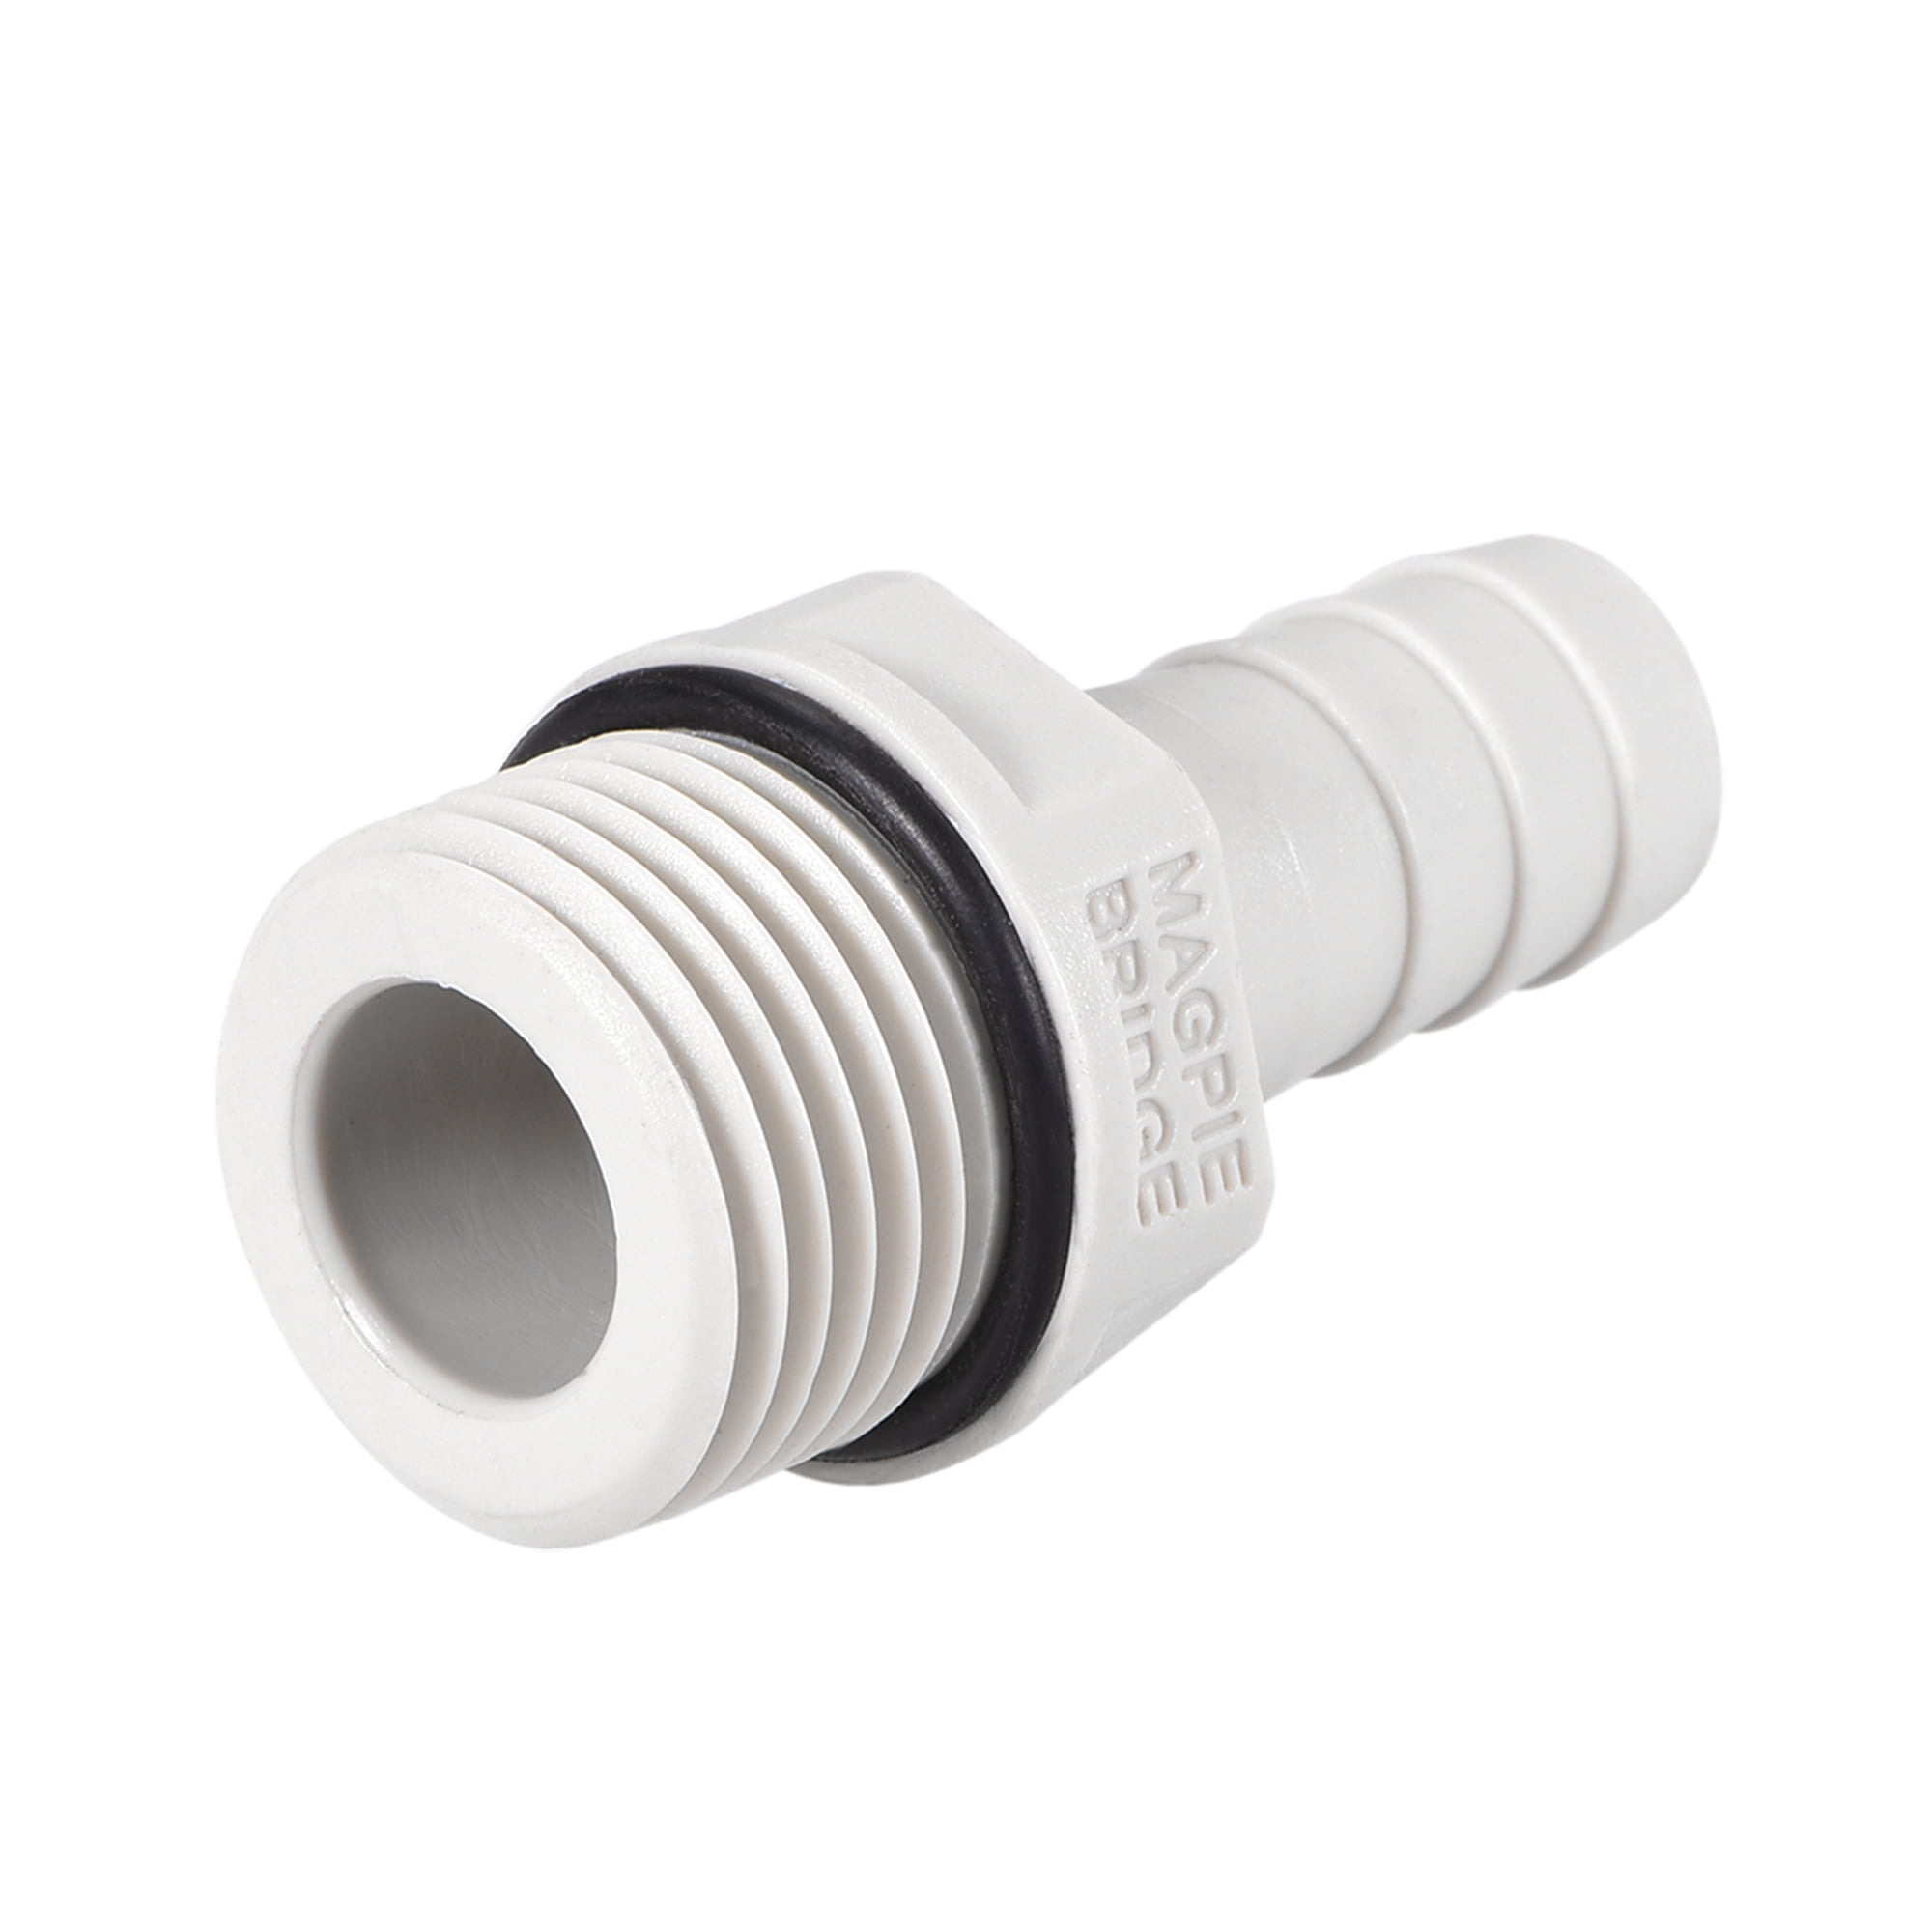 Hose Connector, Barbed, 1.5 Inch to 1.5 Inch, AH74 / 107815 / 1685-0176 /  1429-015